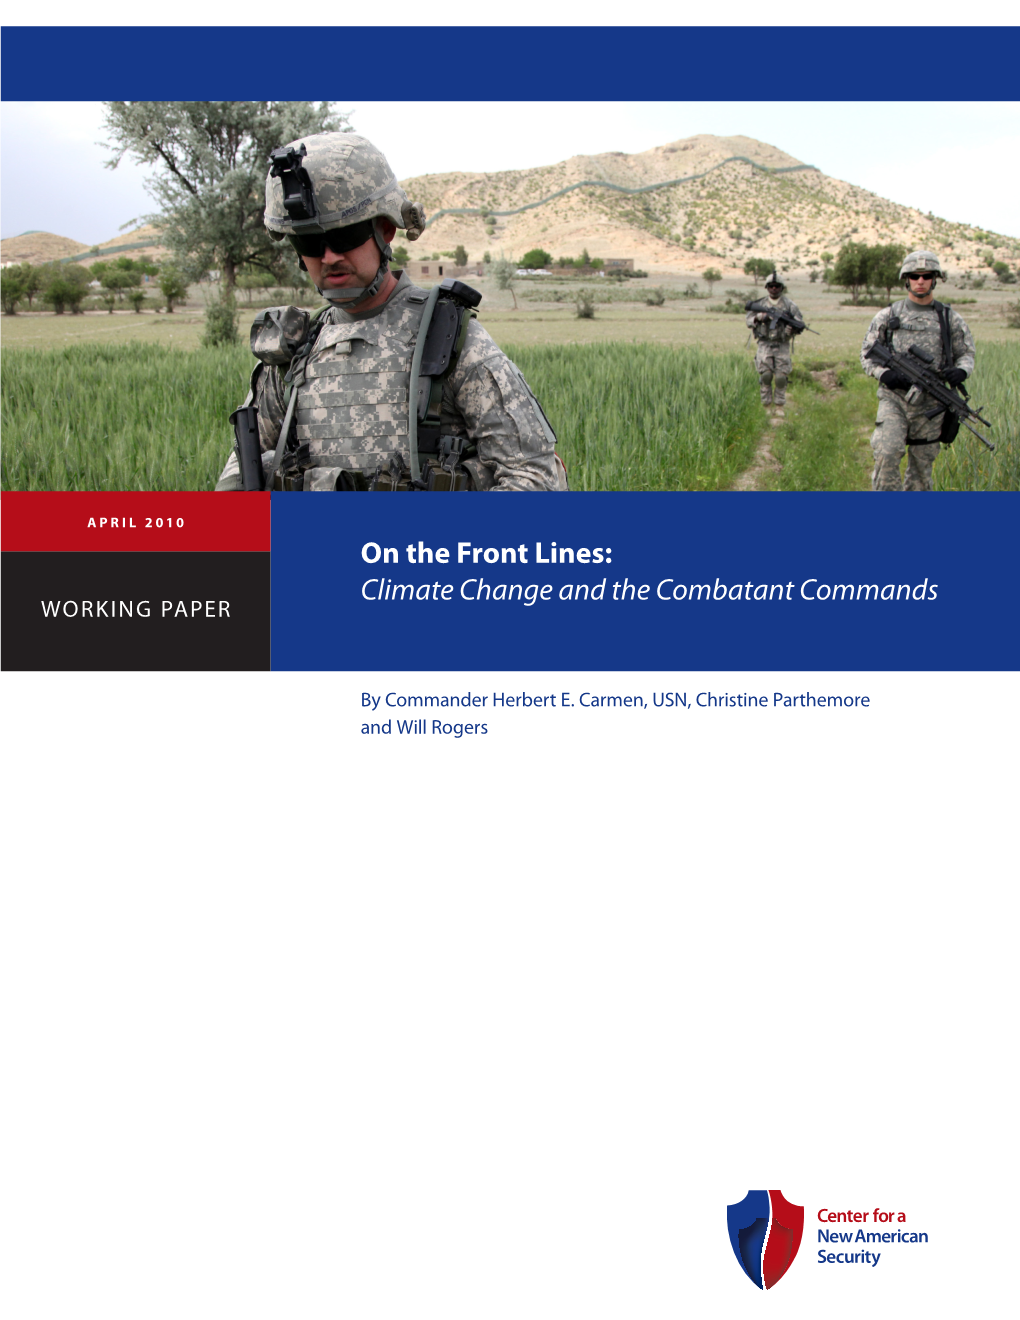 On the Front Lines: Climate Change and the Combatant Commands Working Paper